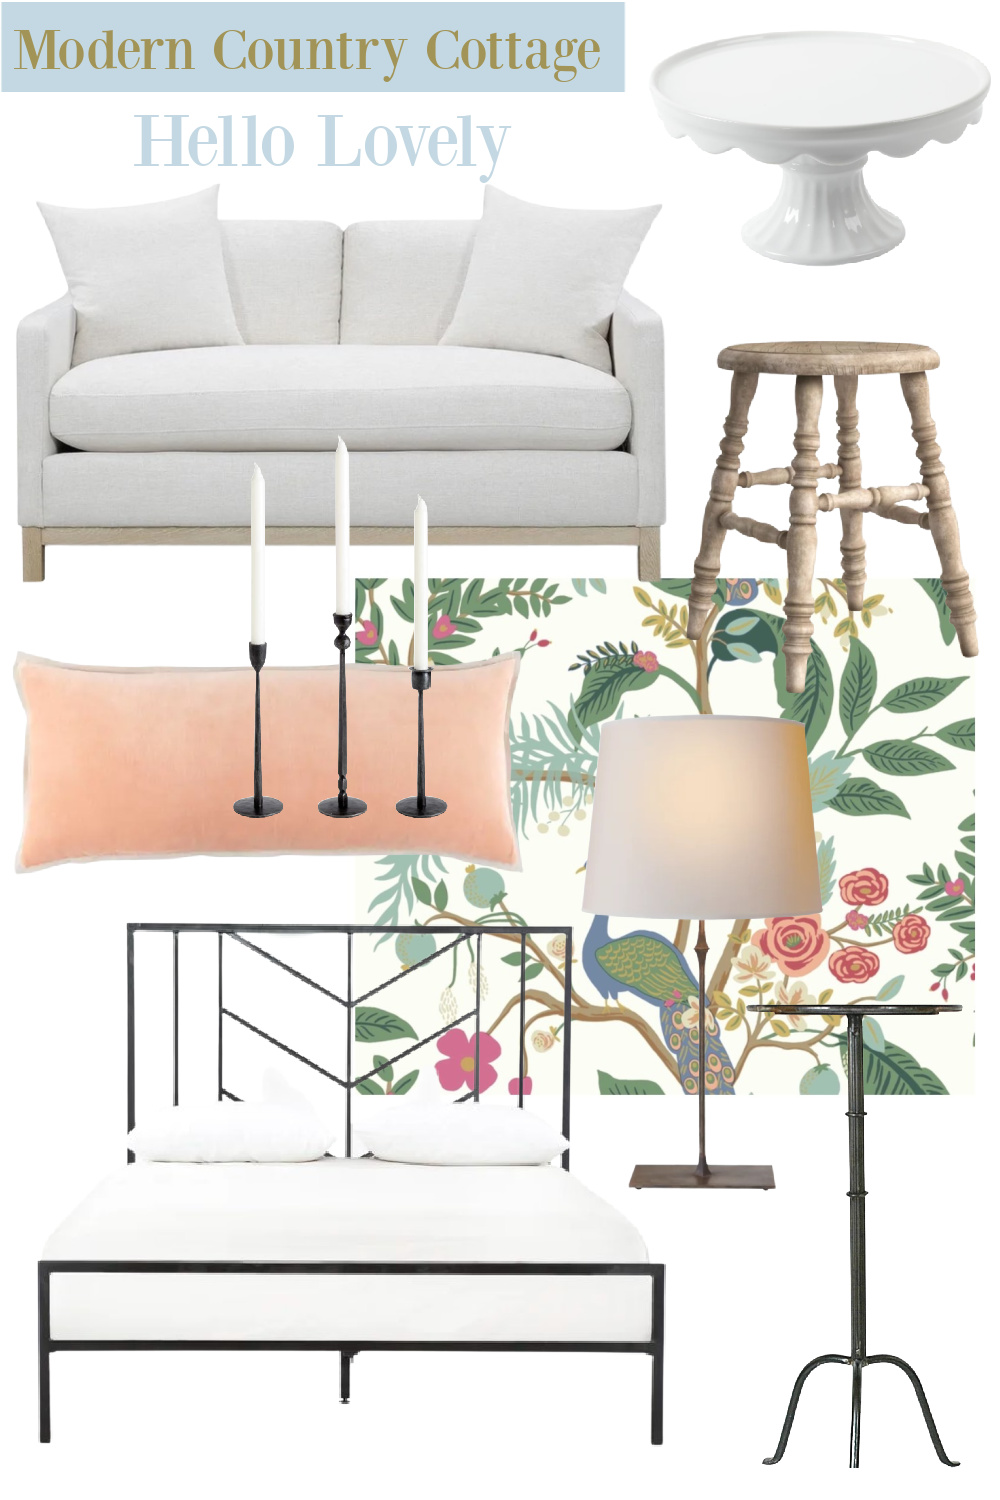 Modern country cottage furniture and decorating resources on Hello Lovely Studio. #moderncountrystyle #getthelook #interiordesign